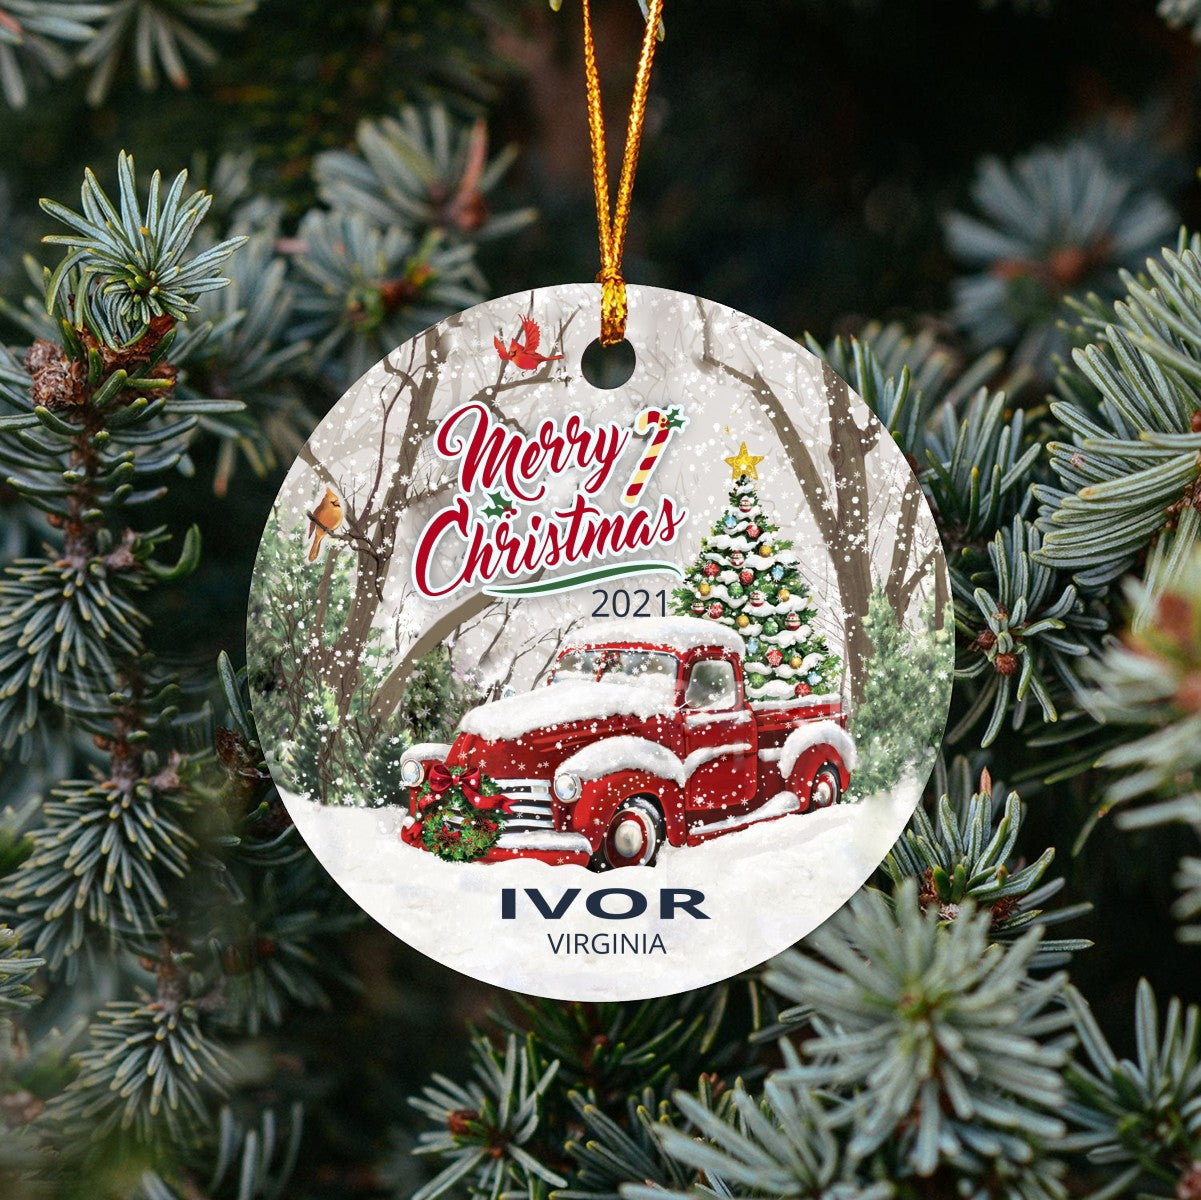 Christmas Tree Ornaments Ivor - Ornament With Name City, State Ivor Virginia VA Ornament - Red Truck Xmas Ornaments 3'' Plastic Gift For Family, Friend And Housewarming